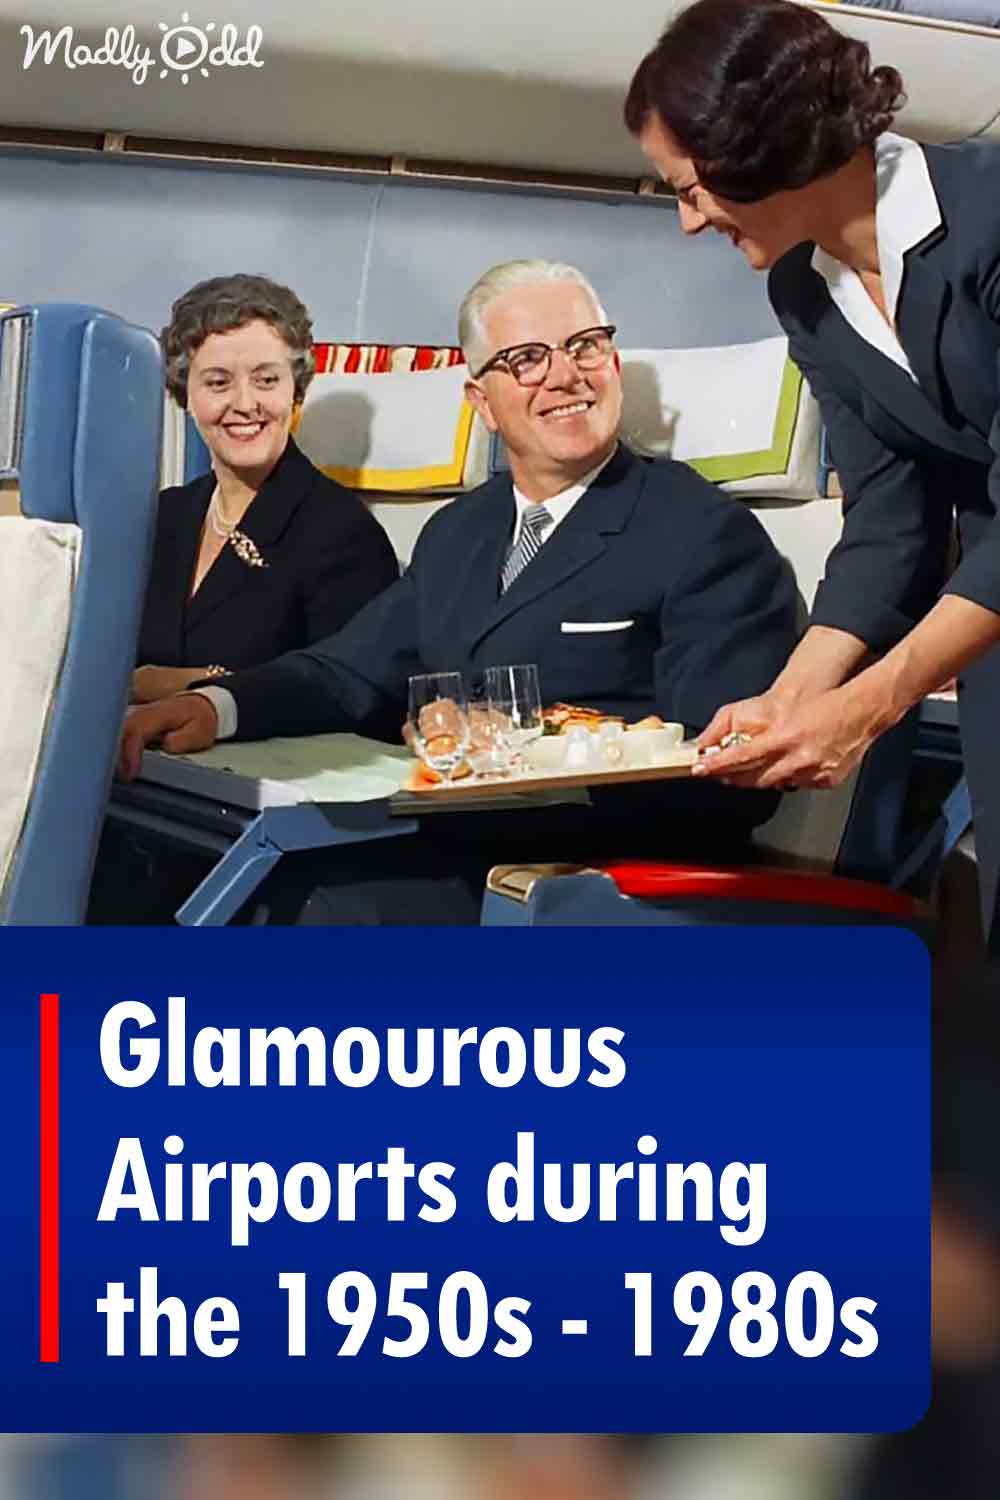 Glamourous Airports during the 1950s - 1980s